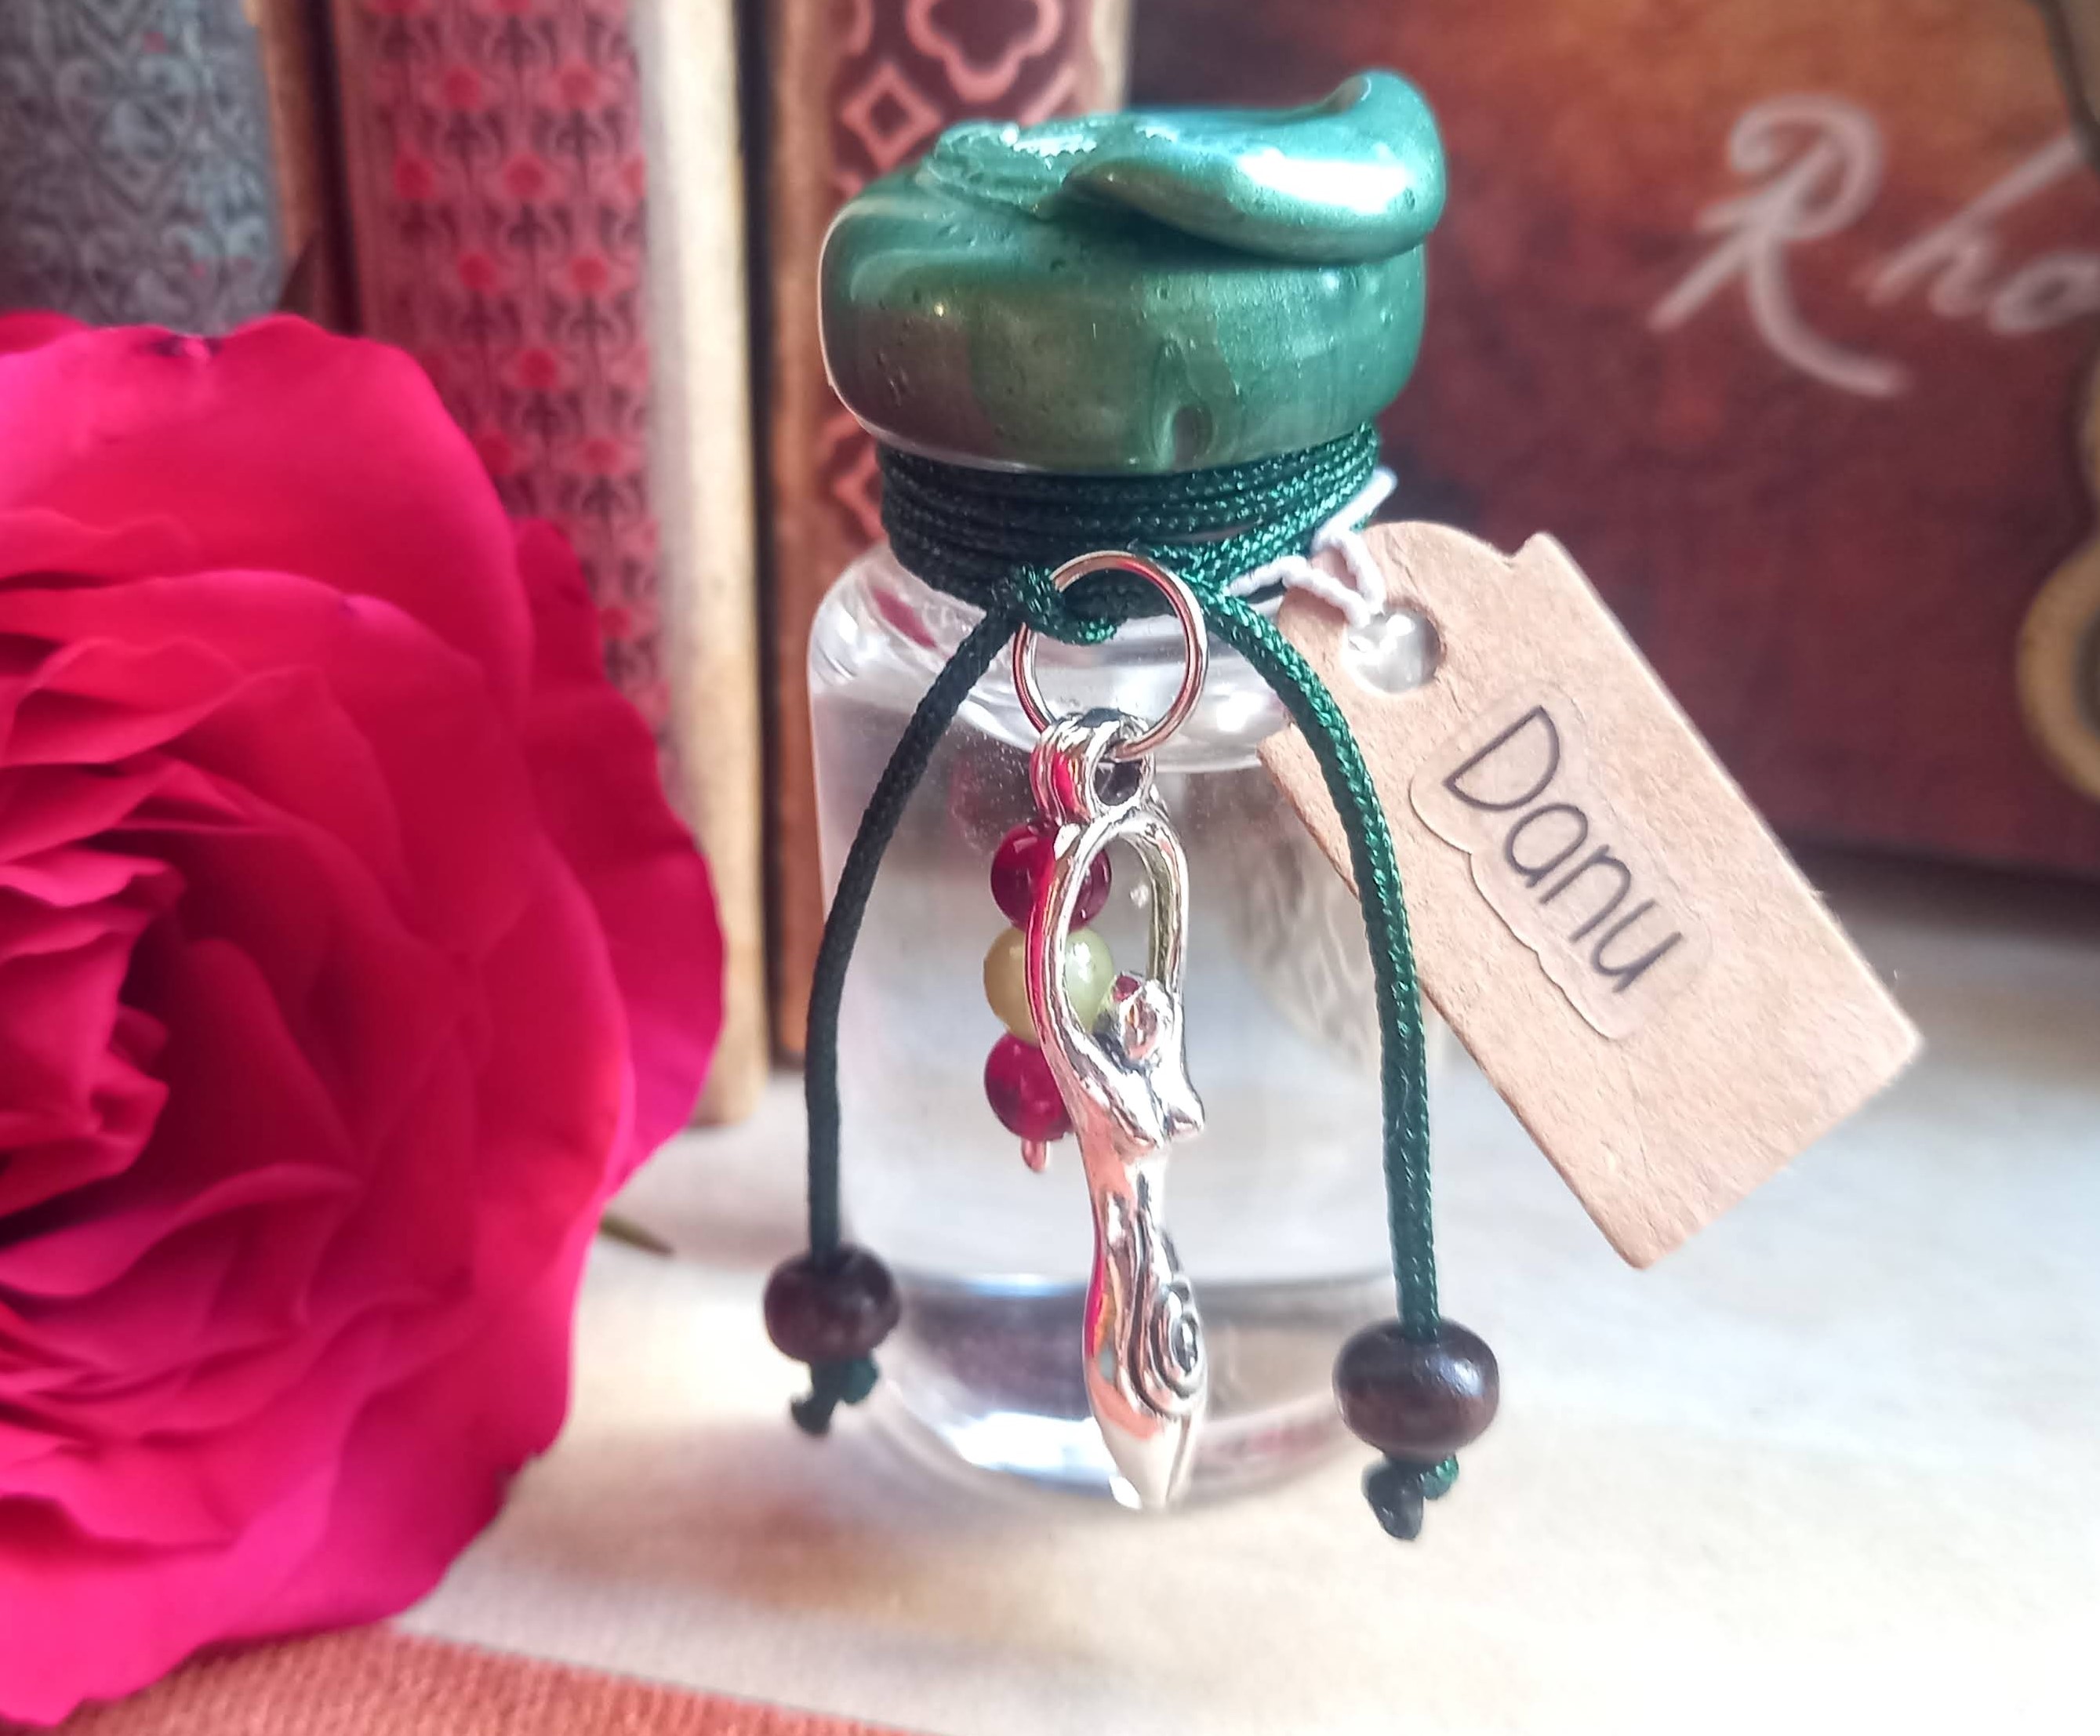 VIAL*Danu Goddess Mother of the Irish - filled with St.Brigid Well Water from an Irish Holy Well.